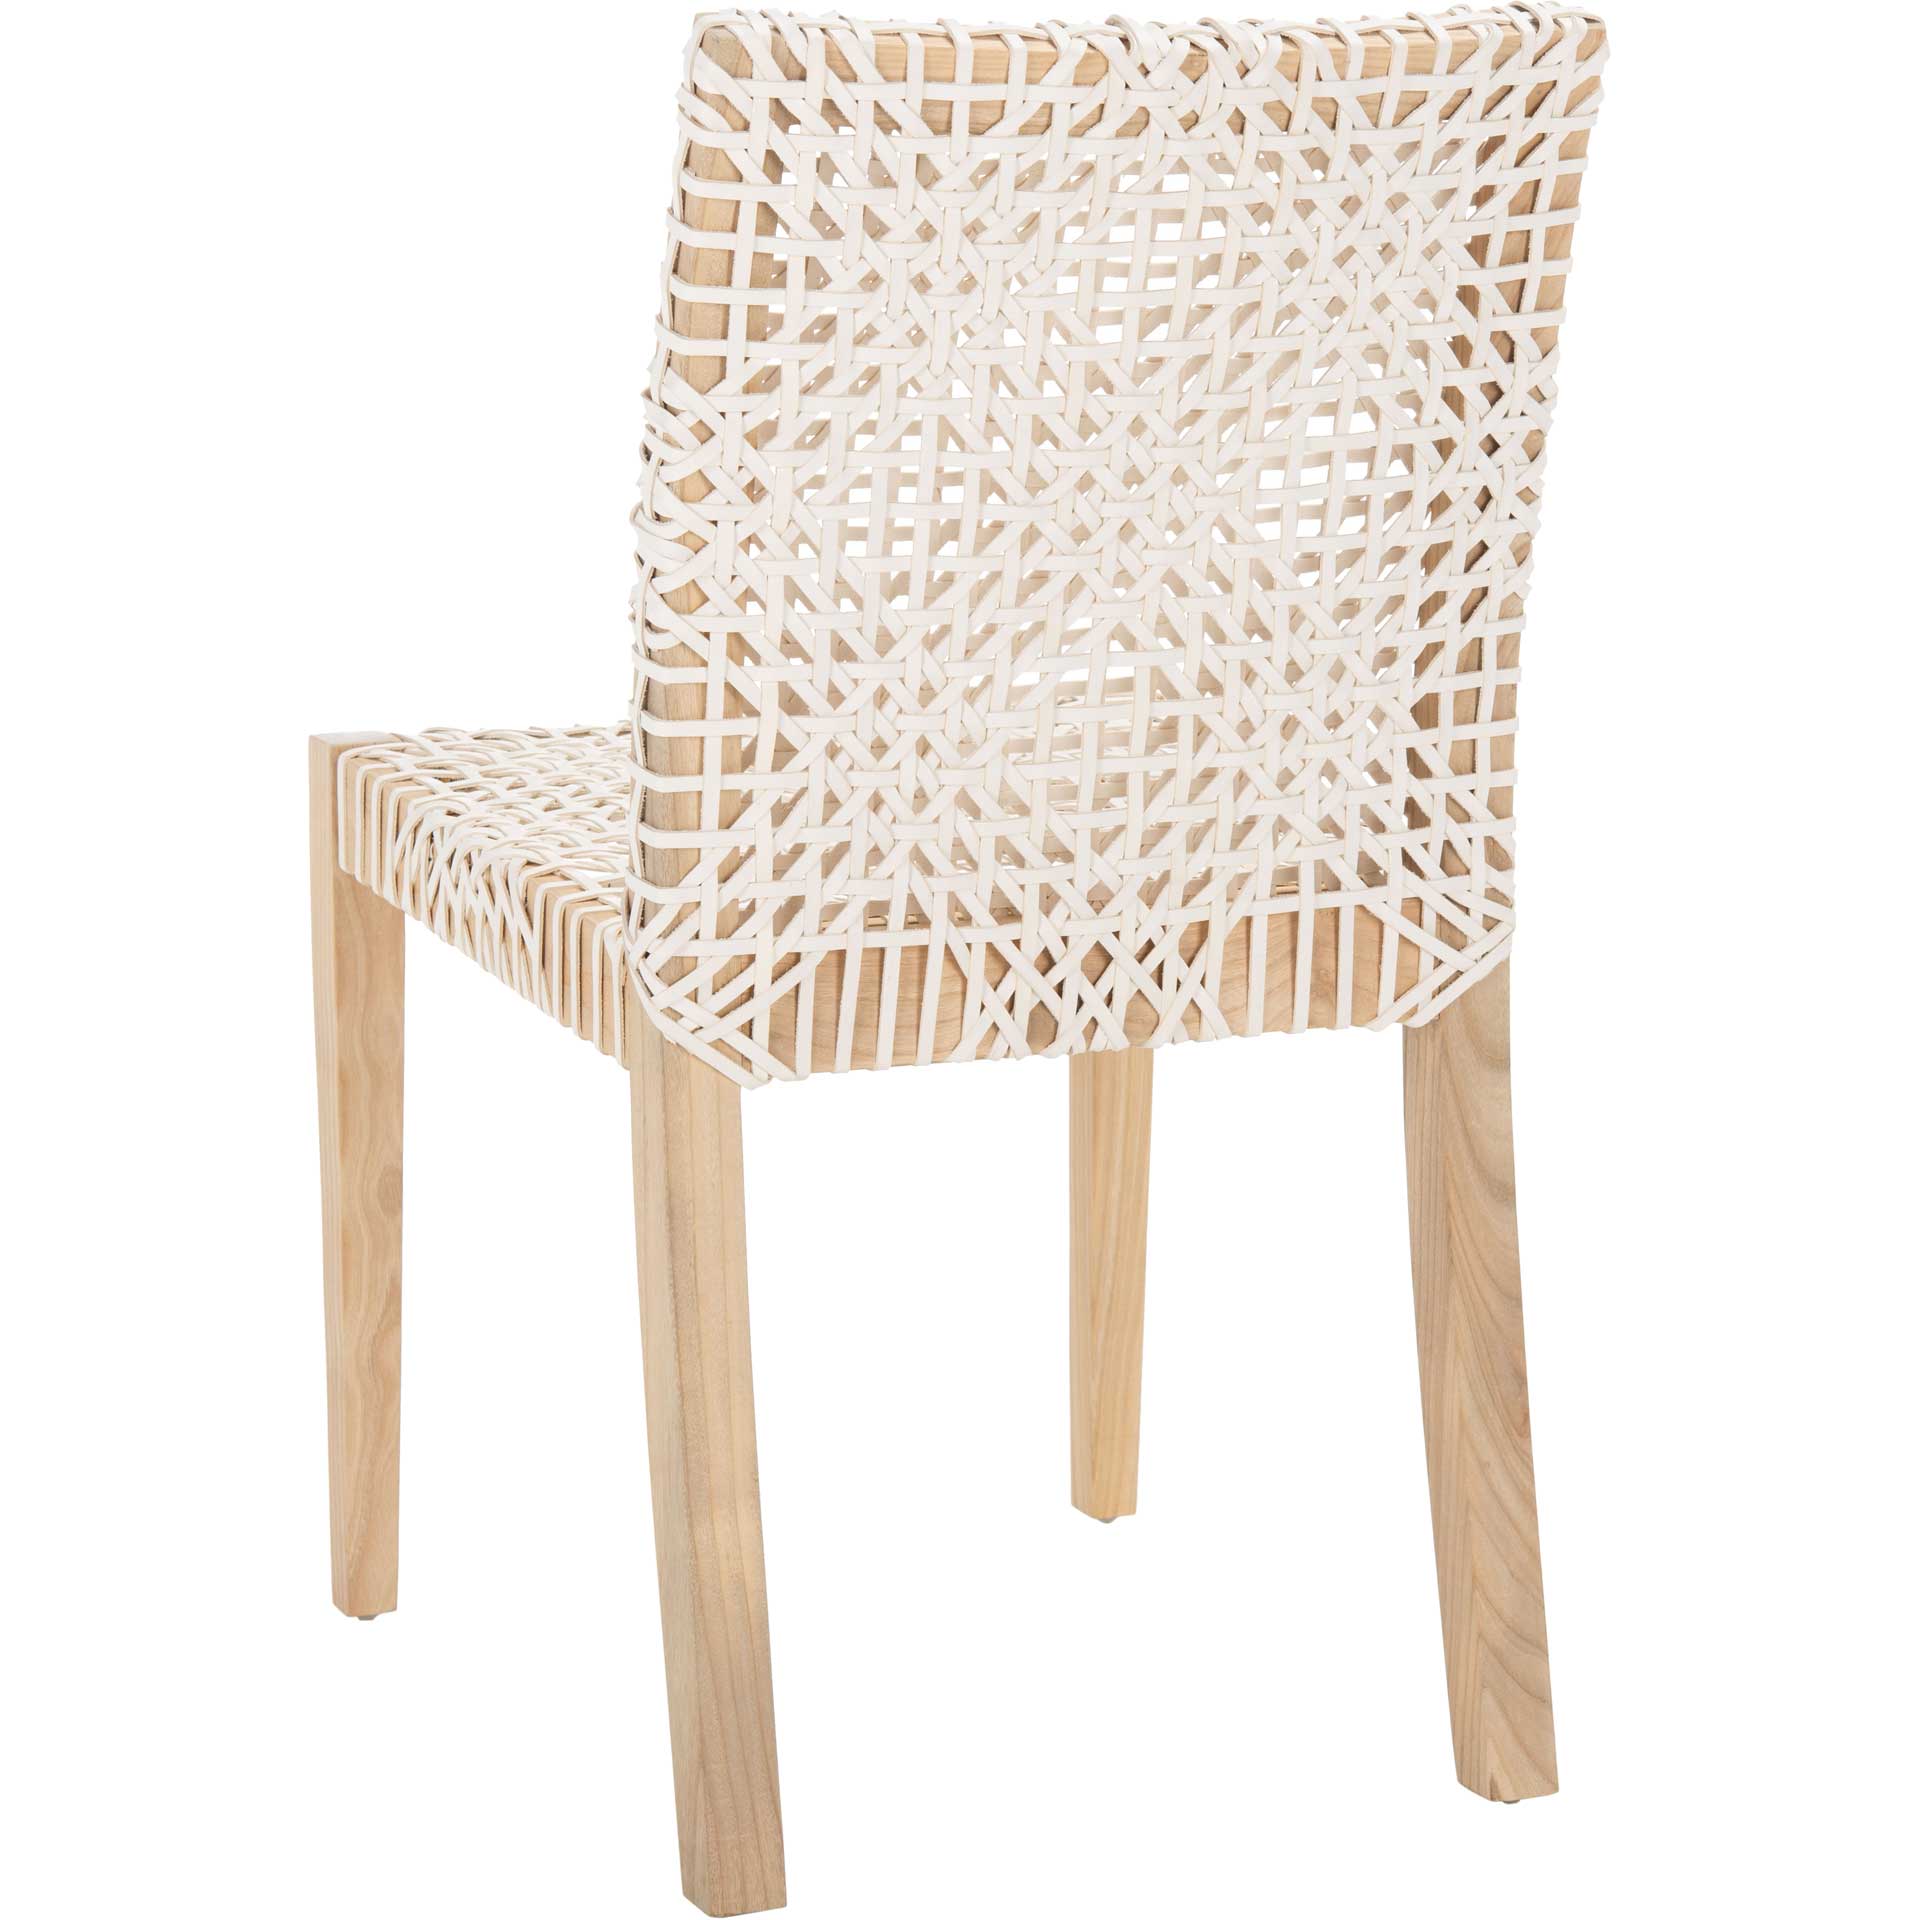 Tycho Leather Dining Chair White/Natural (Set of 2)